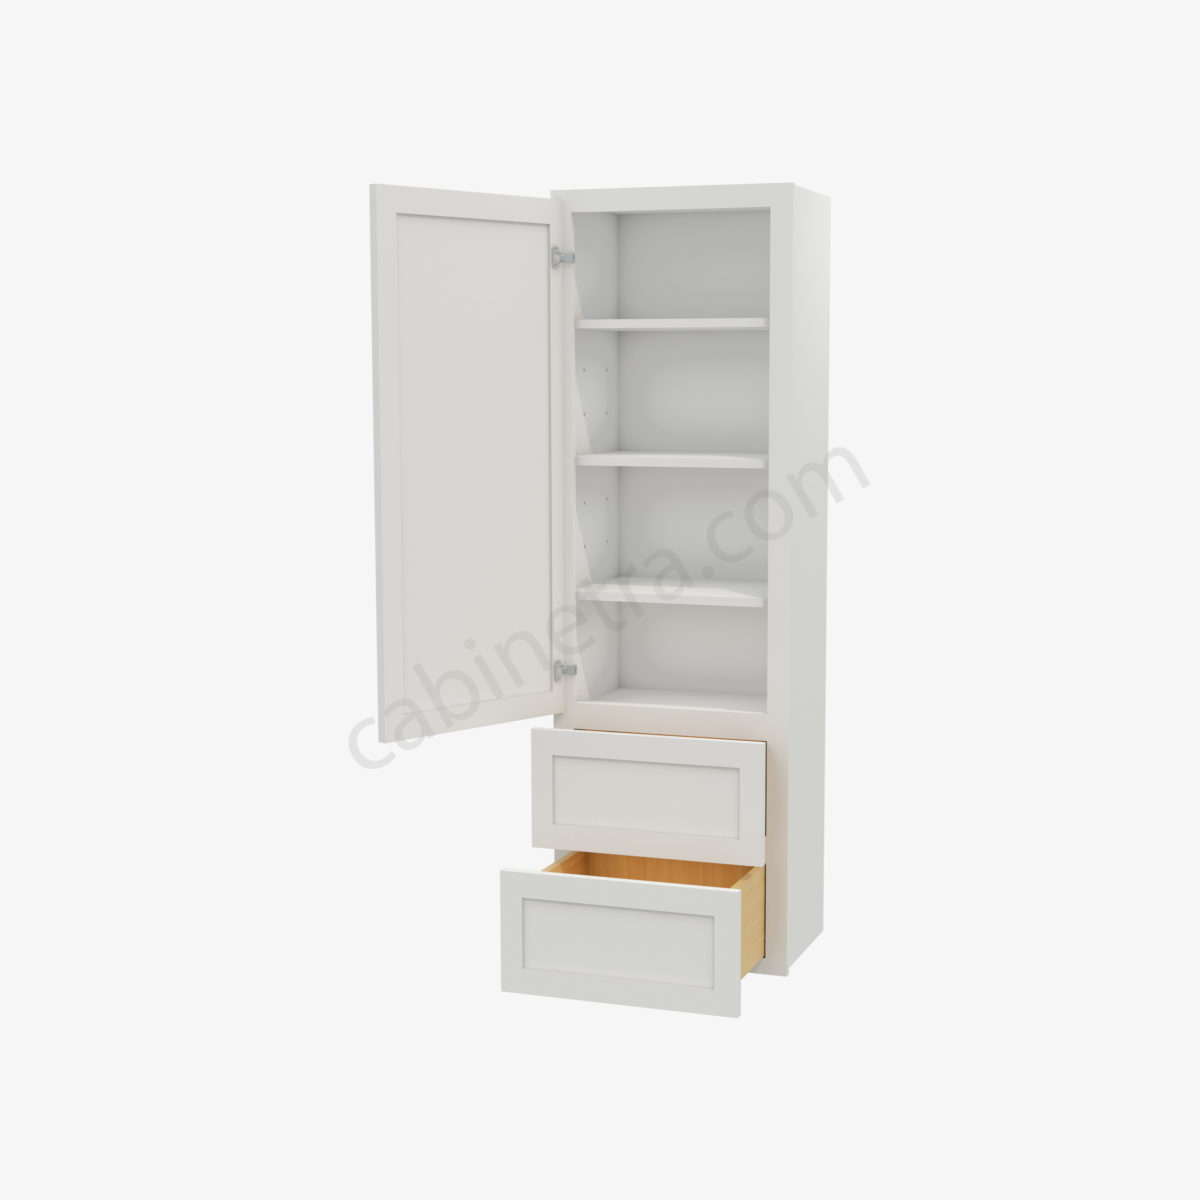 AW W2D1860 5 Forevermark Ice White Shaker Cabinetra scaled